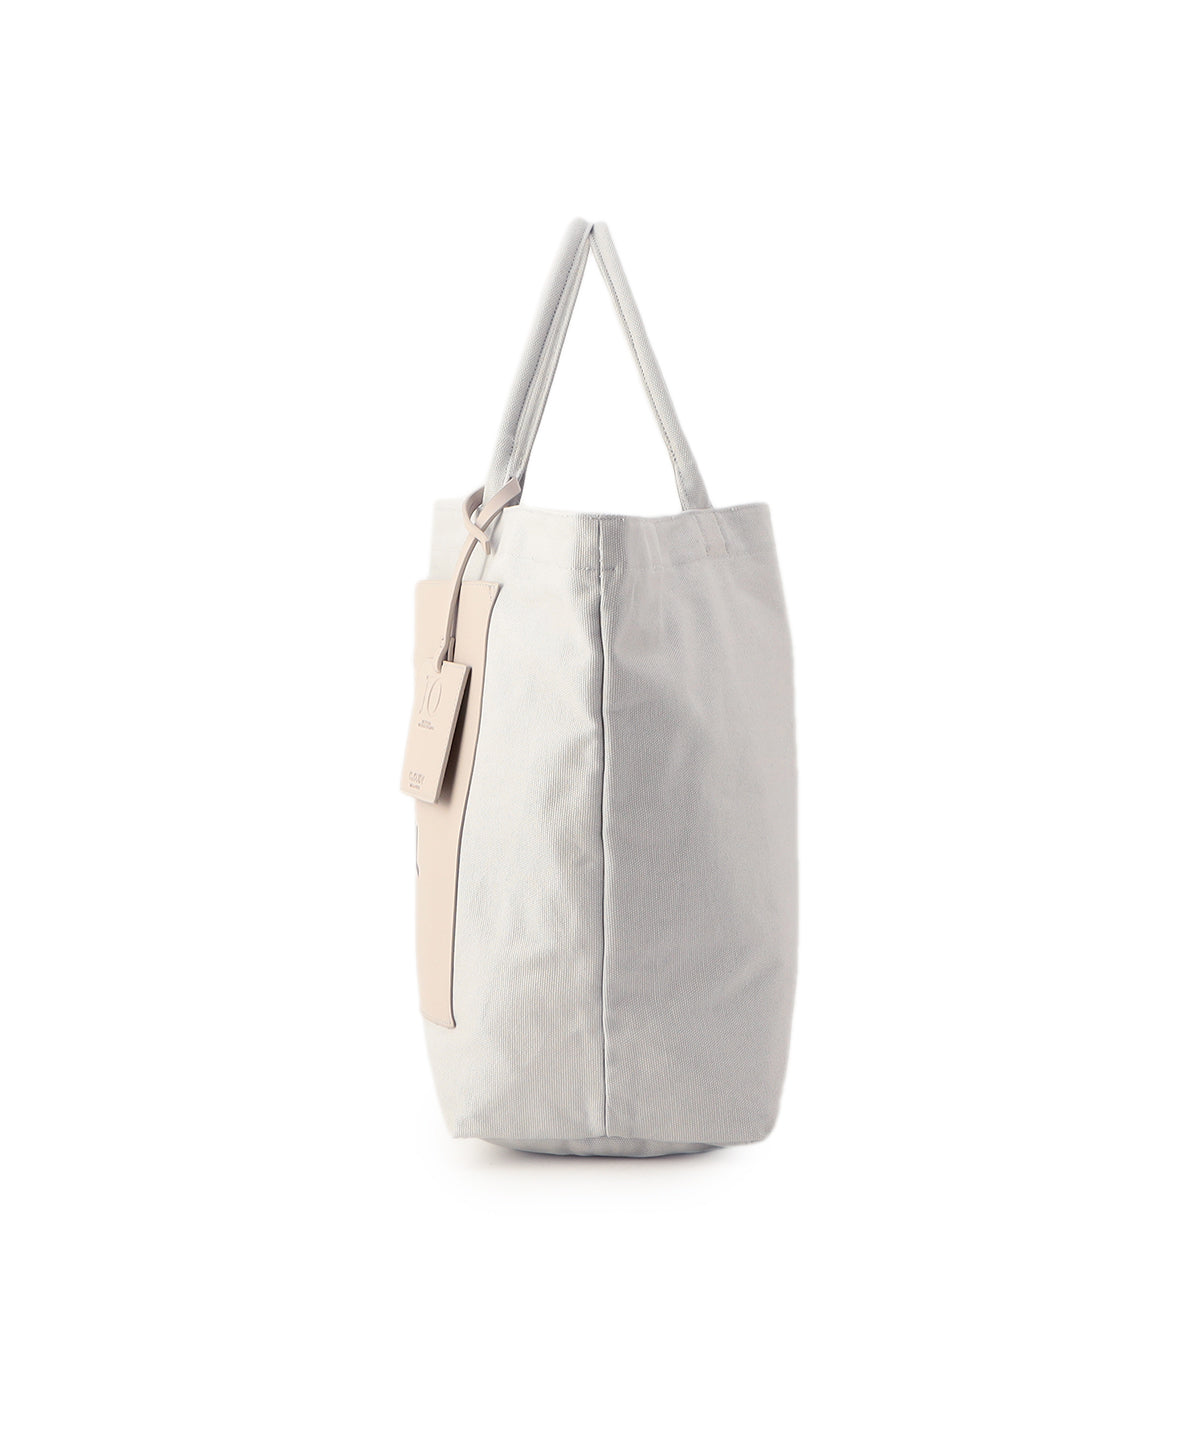 Colored Canvas Tote (Large) L.GRAY | バッグ | CLOUDY公式通販サイト